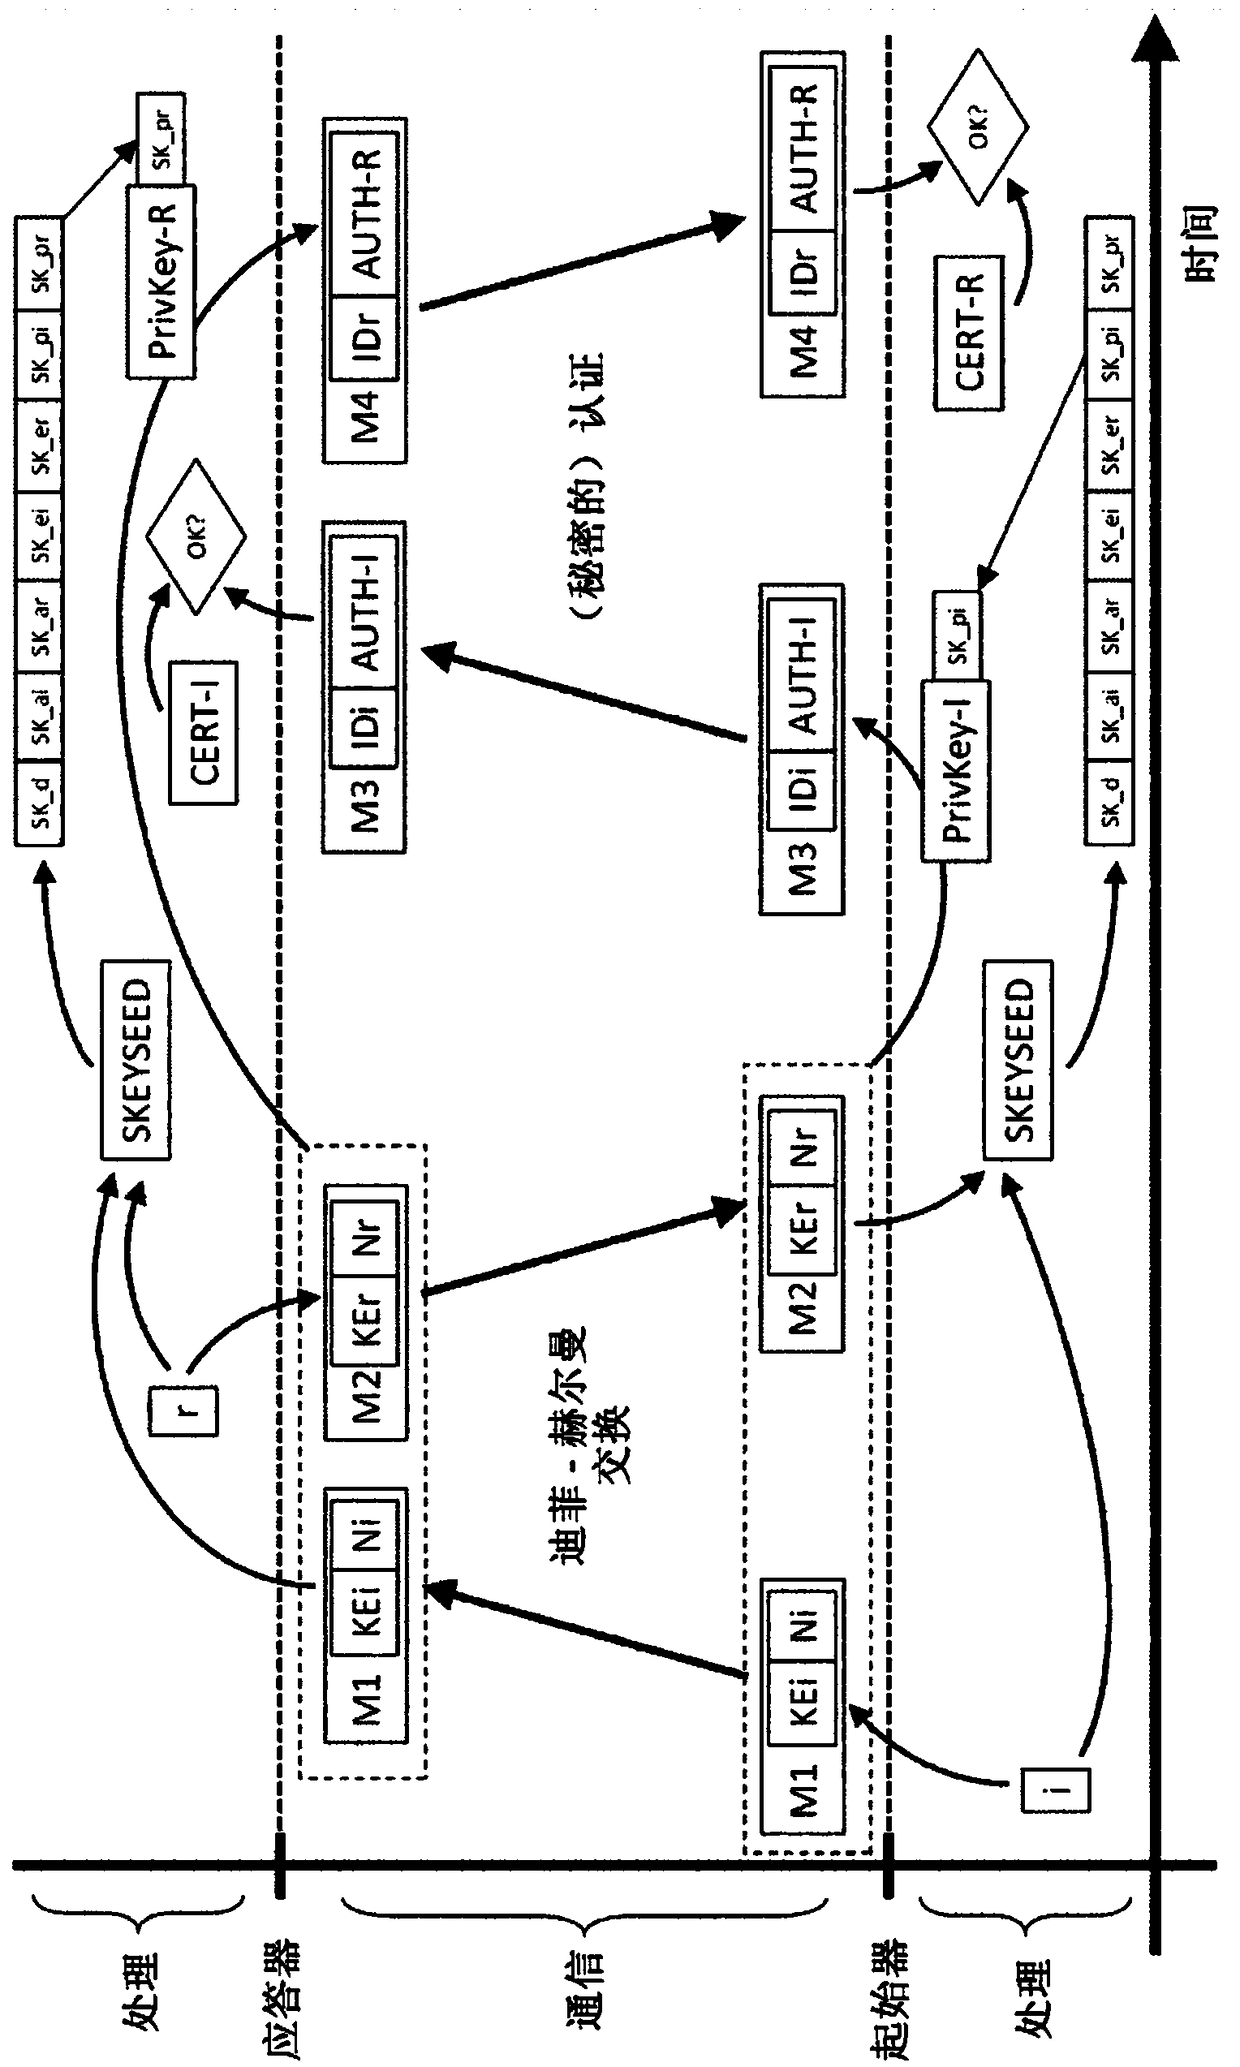 Method and assembly for establishing a secure communication between a first network device (initiator) and a second network device (responder)